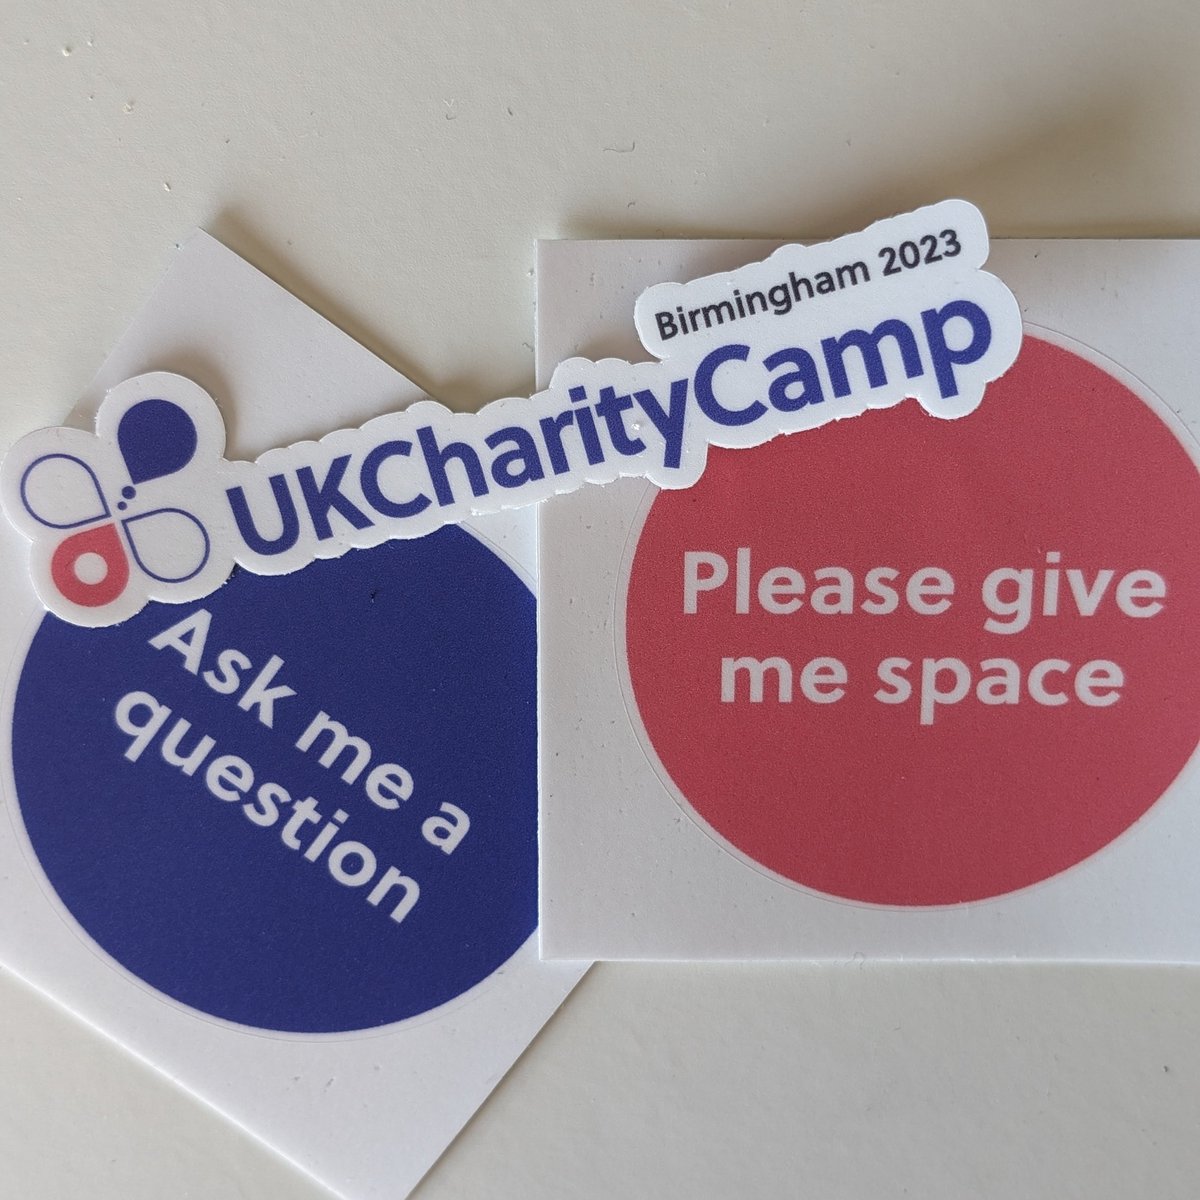 Less than 48hours until the first #UKCharityCamp We can't wait to see you all there 👋 Thanks again to our lovely sponsors for making this happen: Neontribe @dxw @UKGovCamp @ProMoCymru @wethecatalysts @uktechforgood @ThirdSectorLab